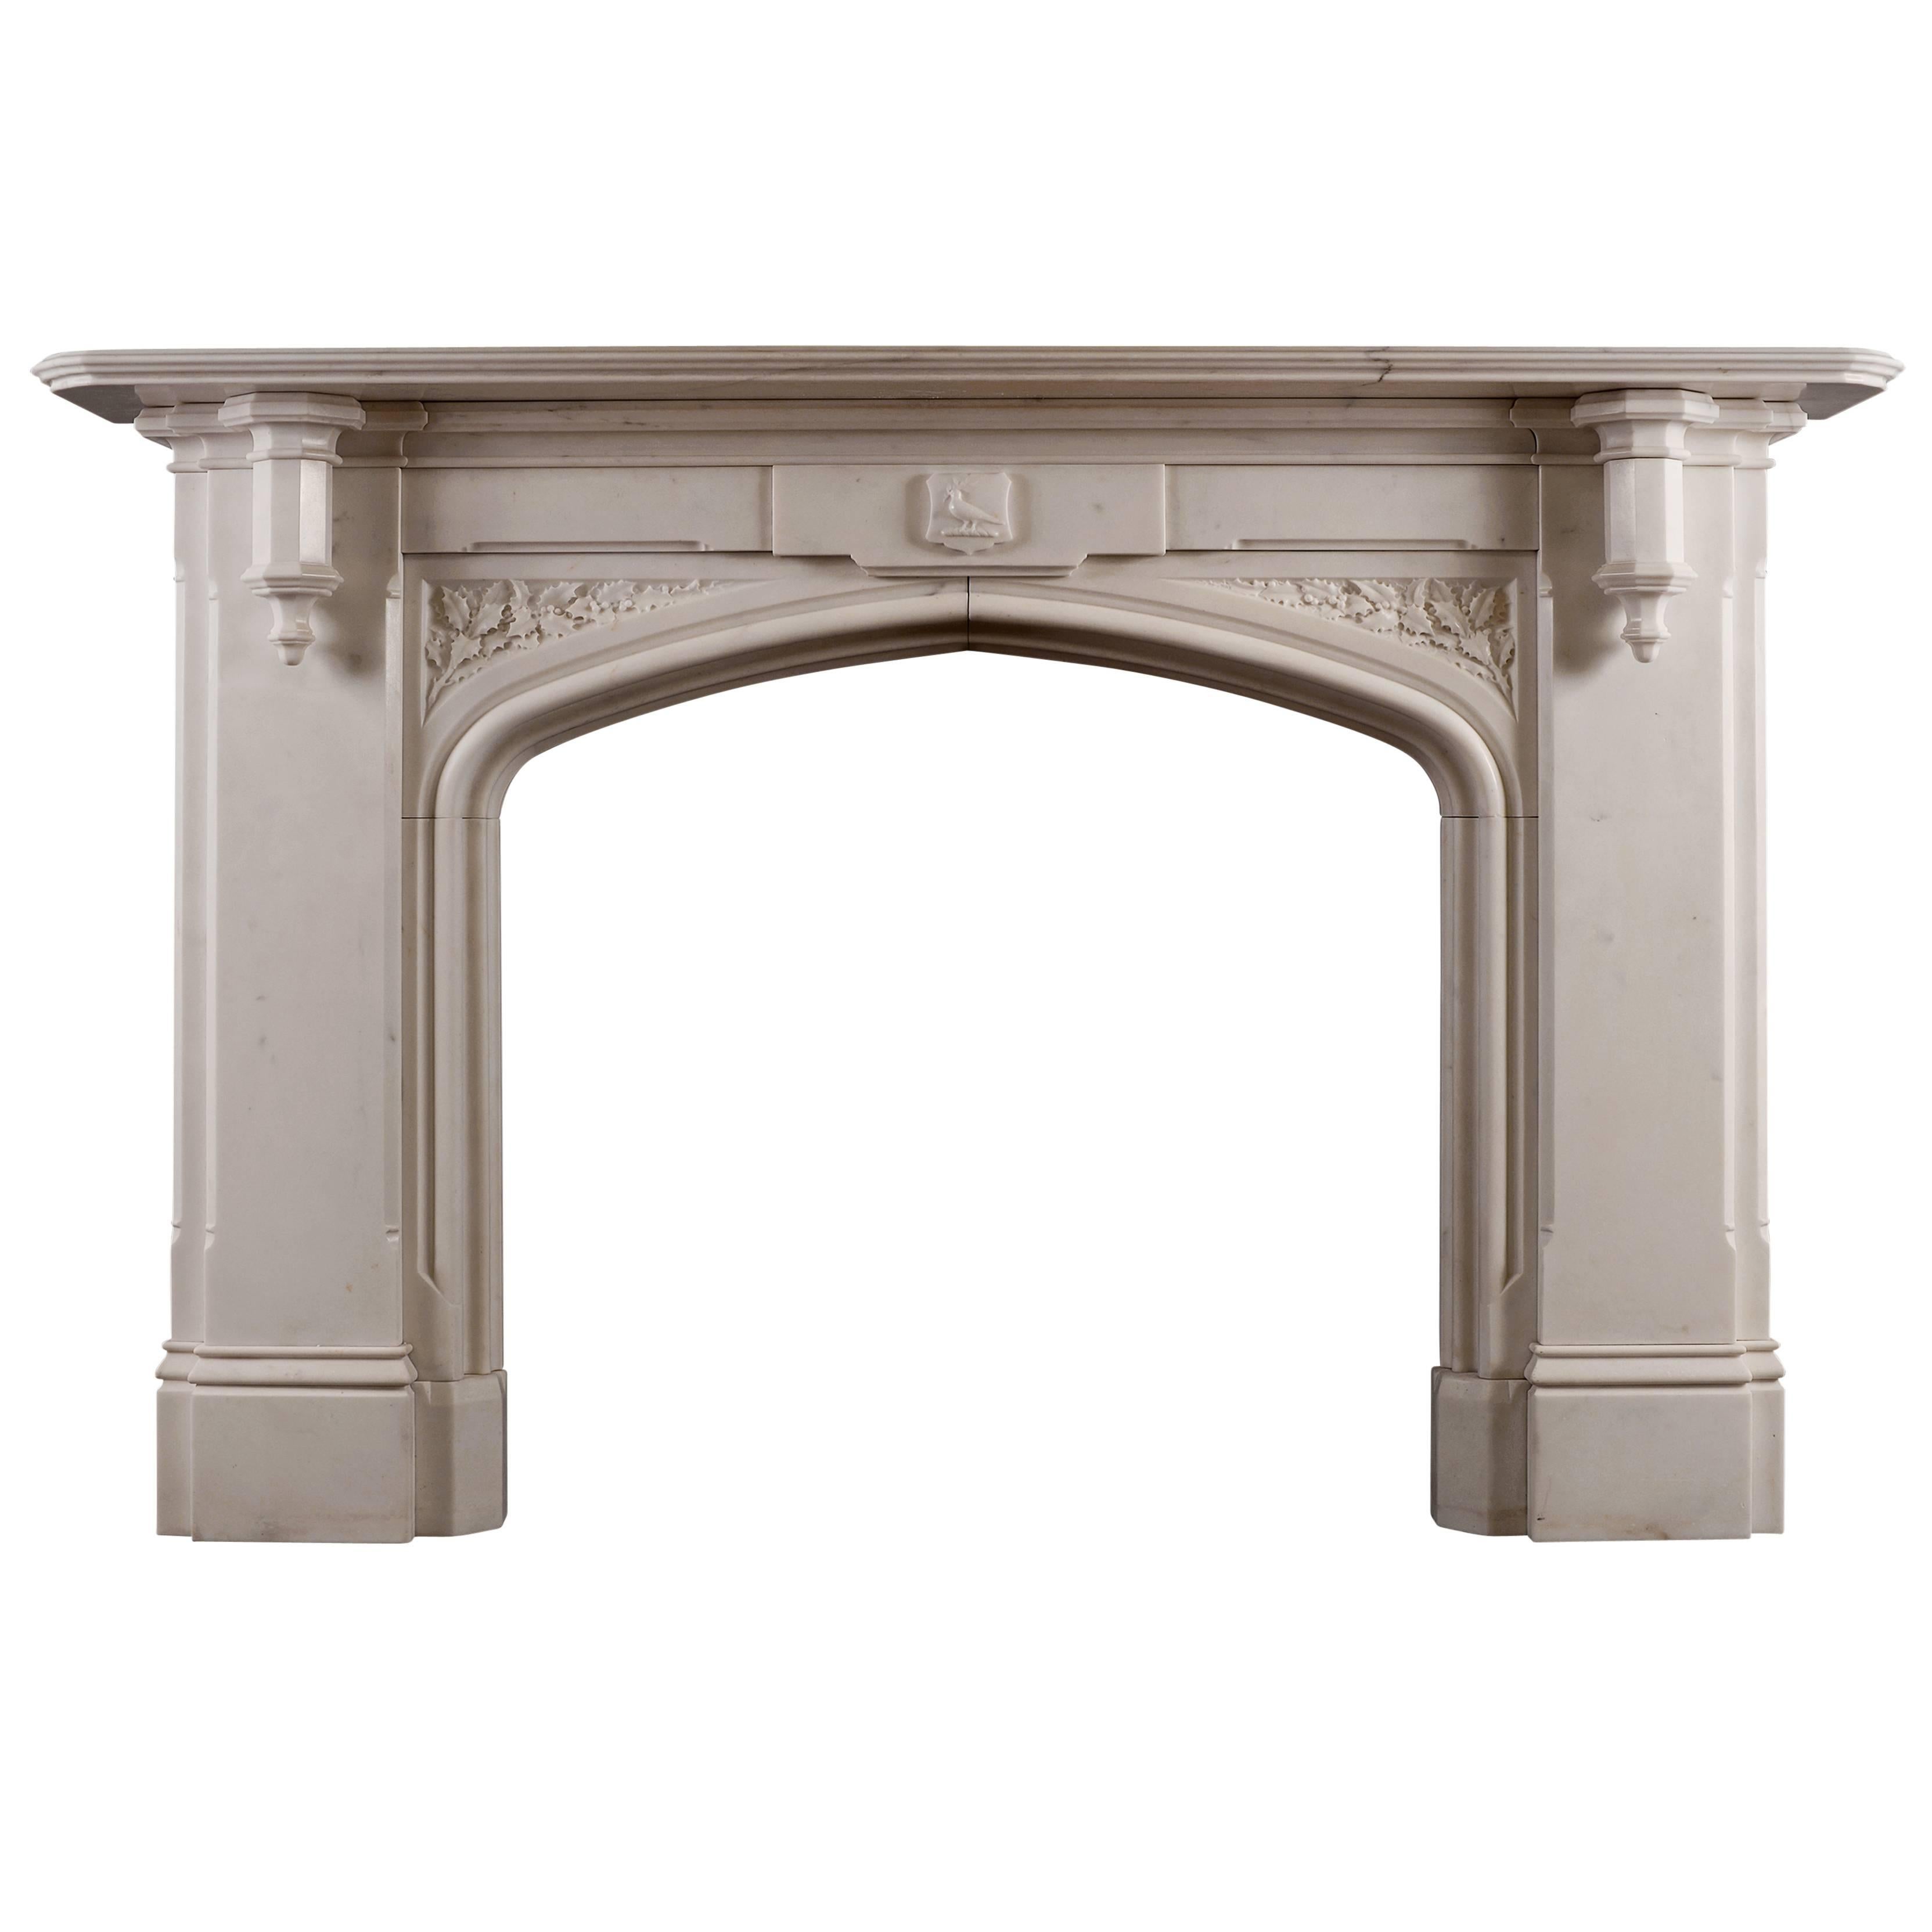 Fine Gothic Revival Statuary Marble Fireplace Mantel For Sale